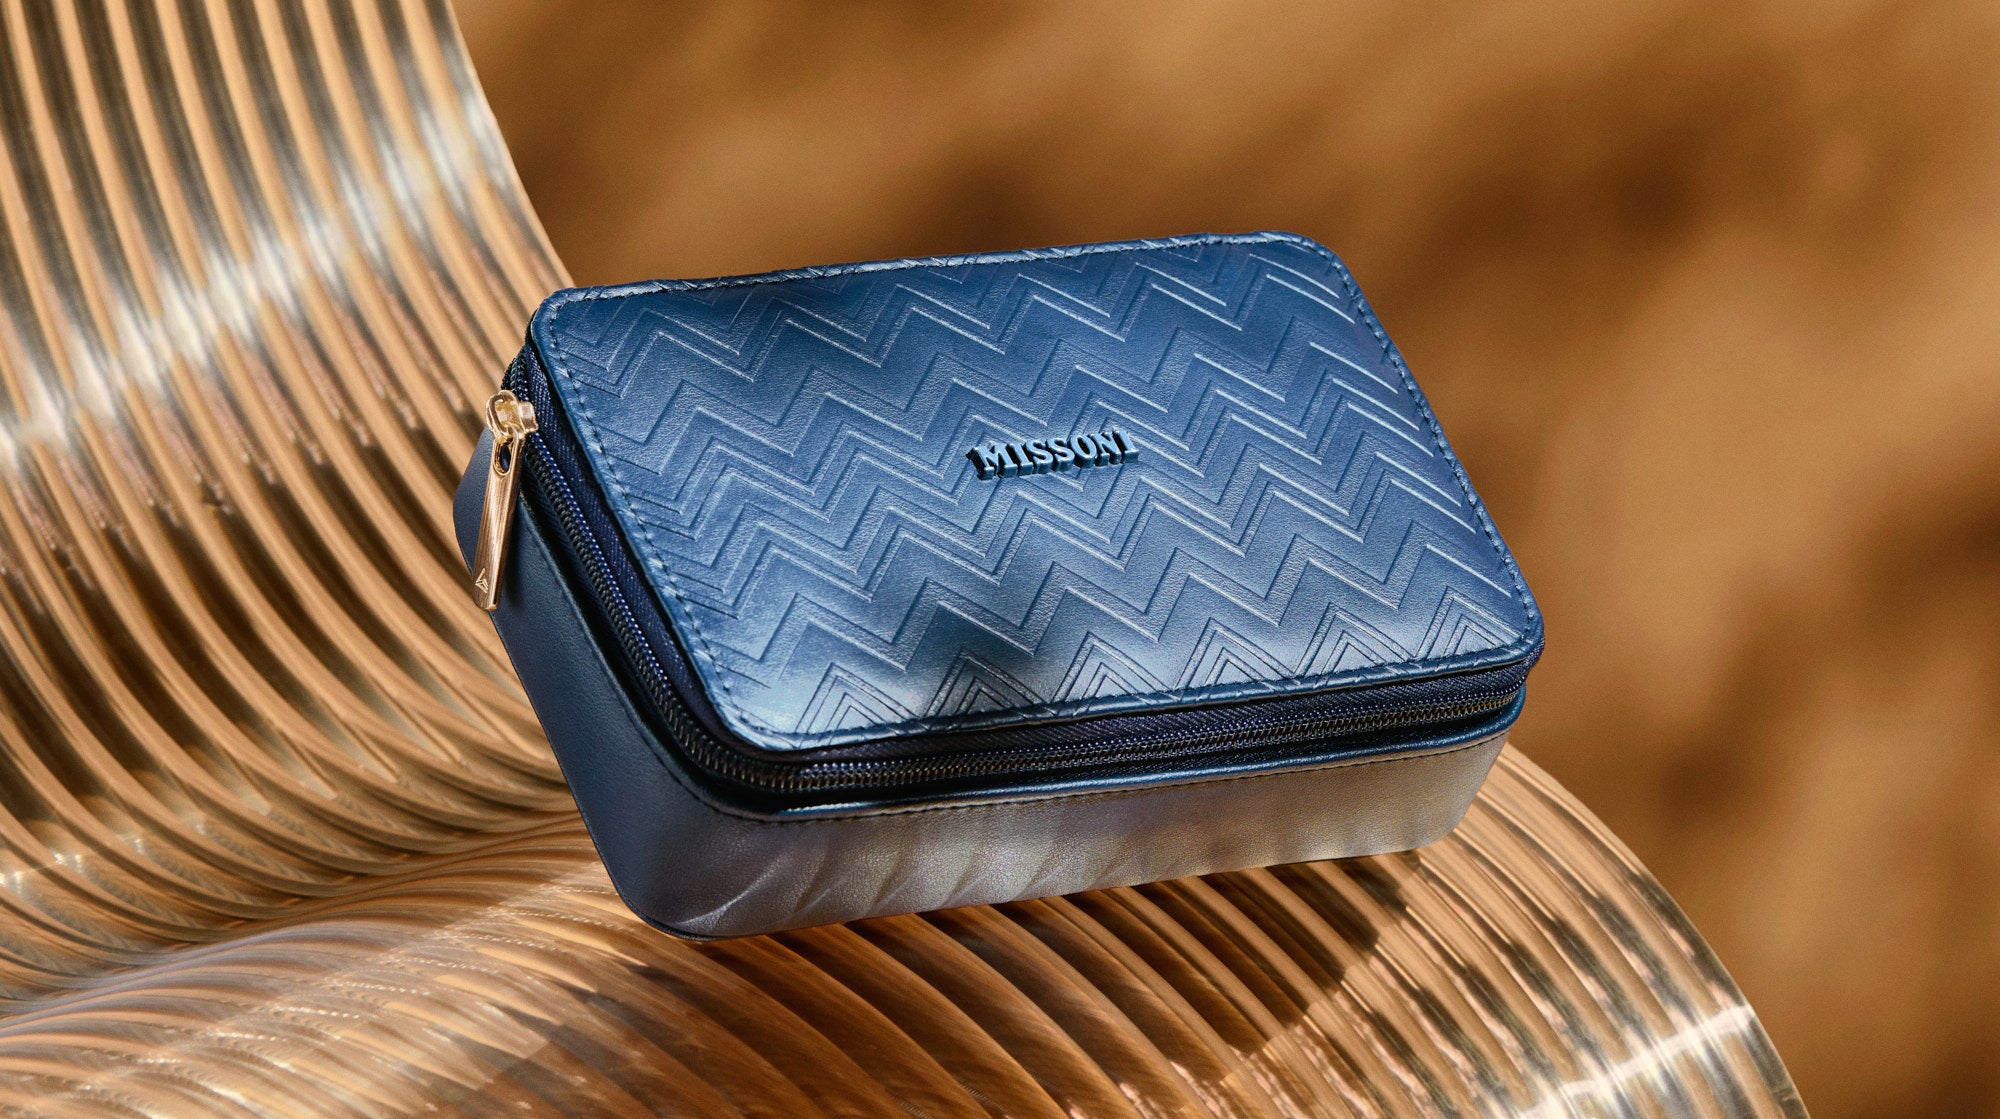 Delta teams up with Missoni for new amenity kits, Delta One lounge ...